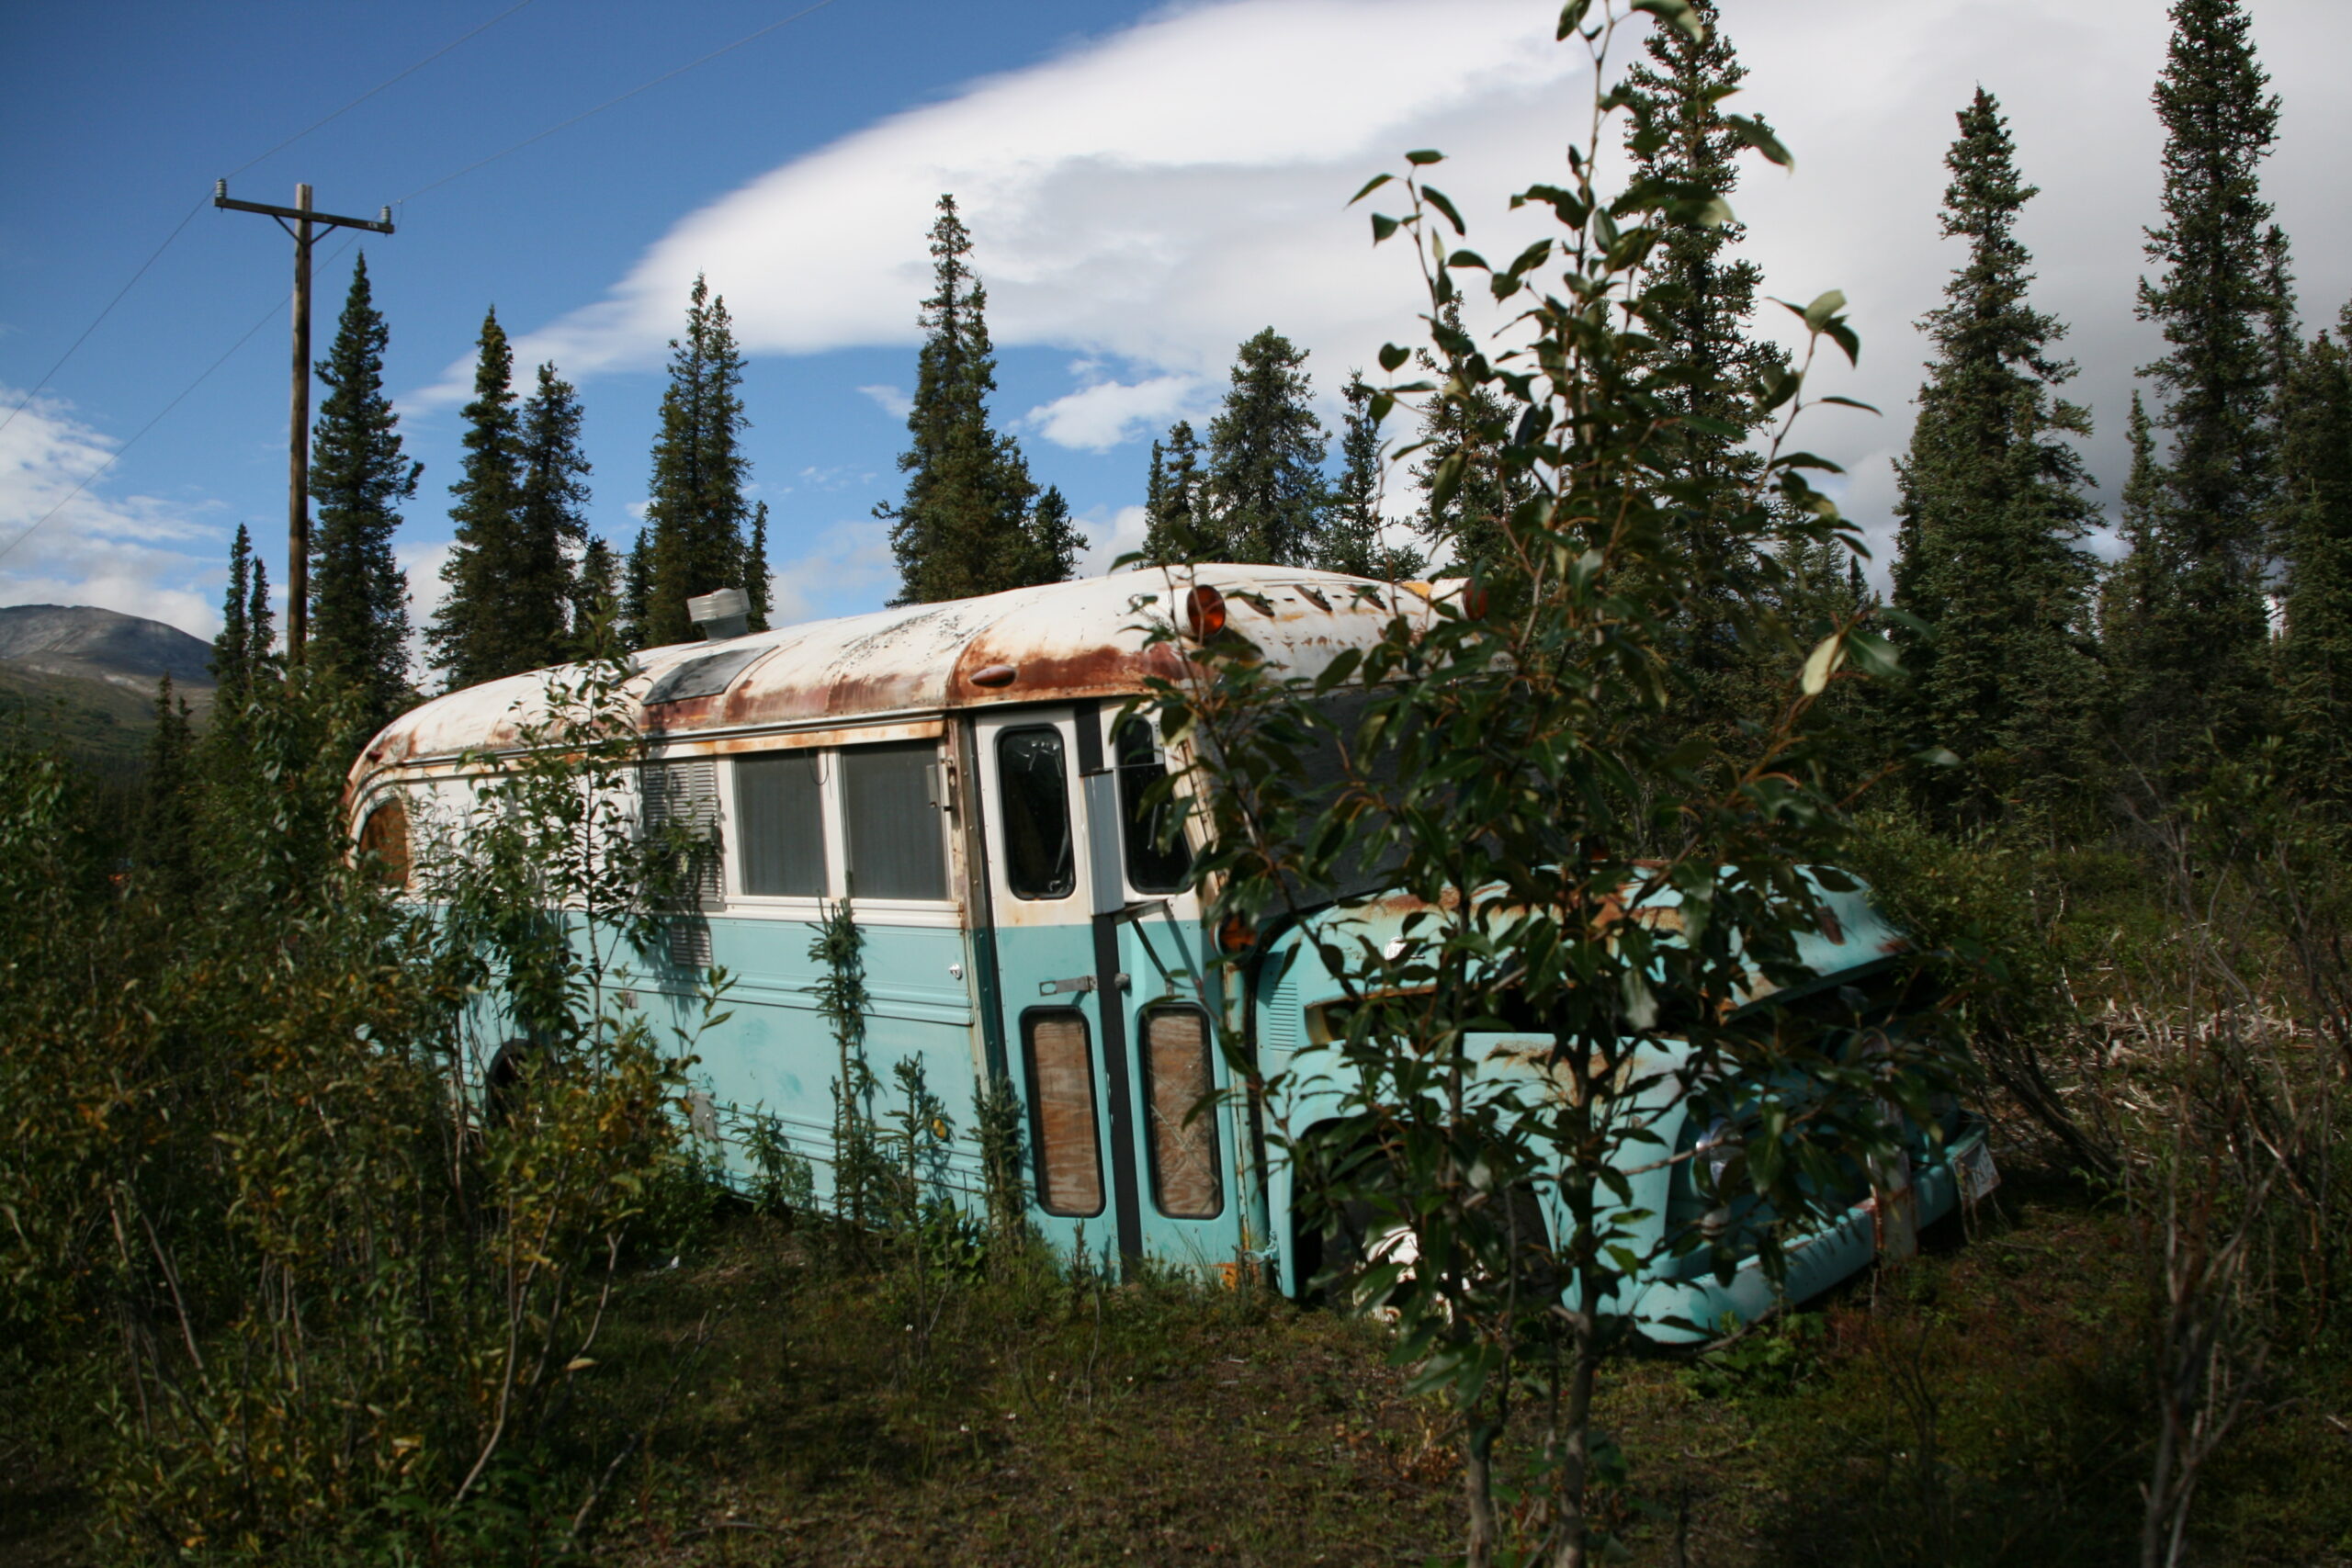 The prop bus used in lieu of the 